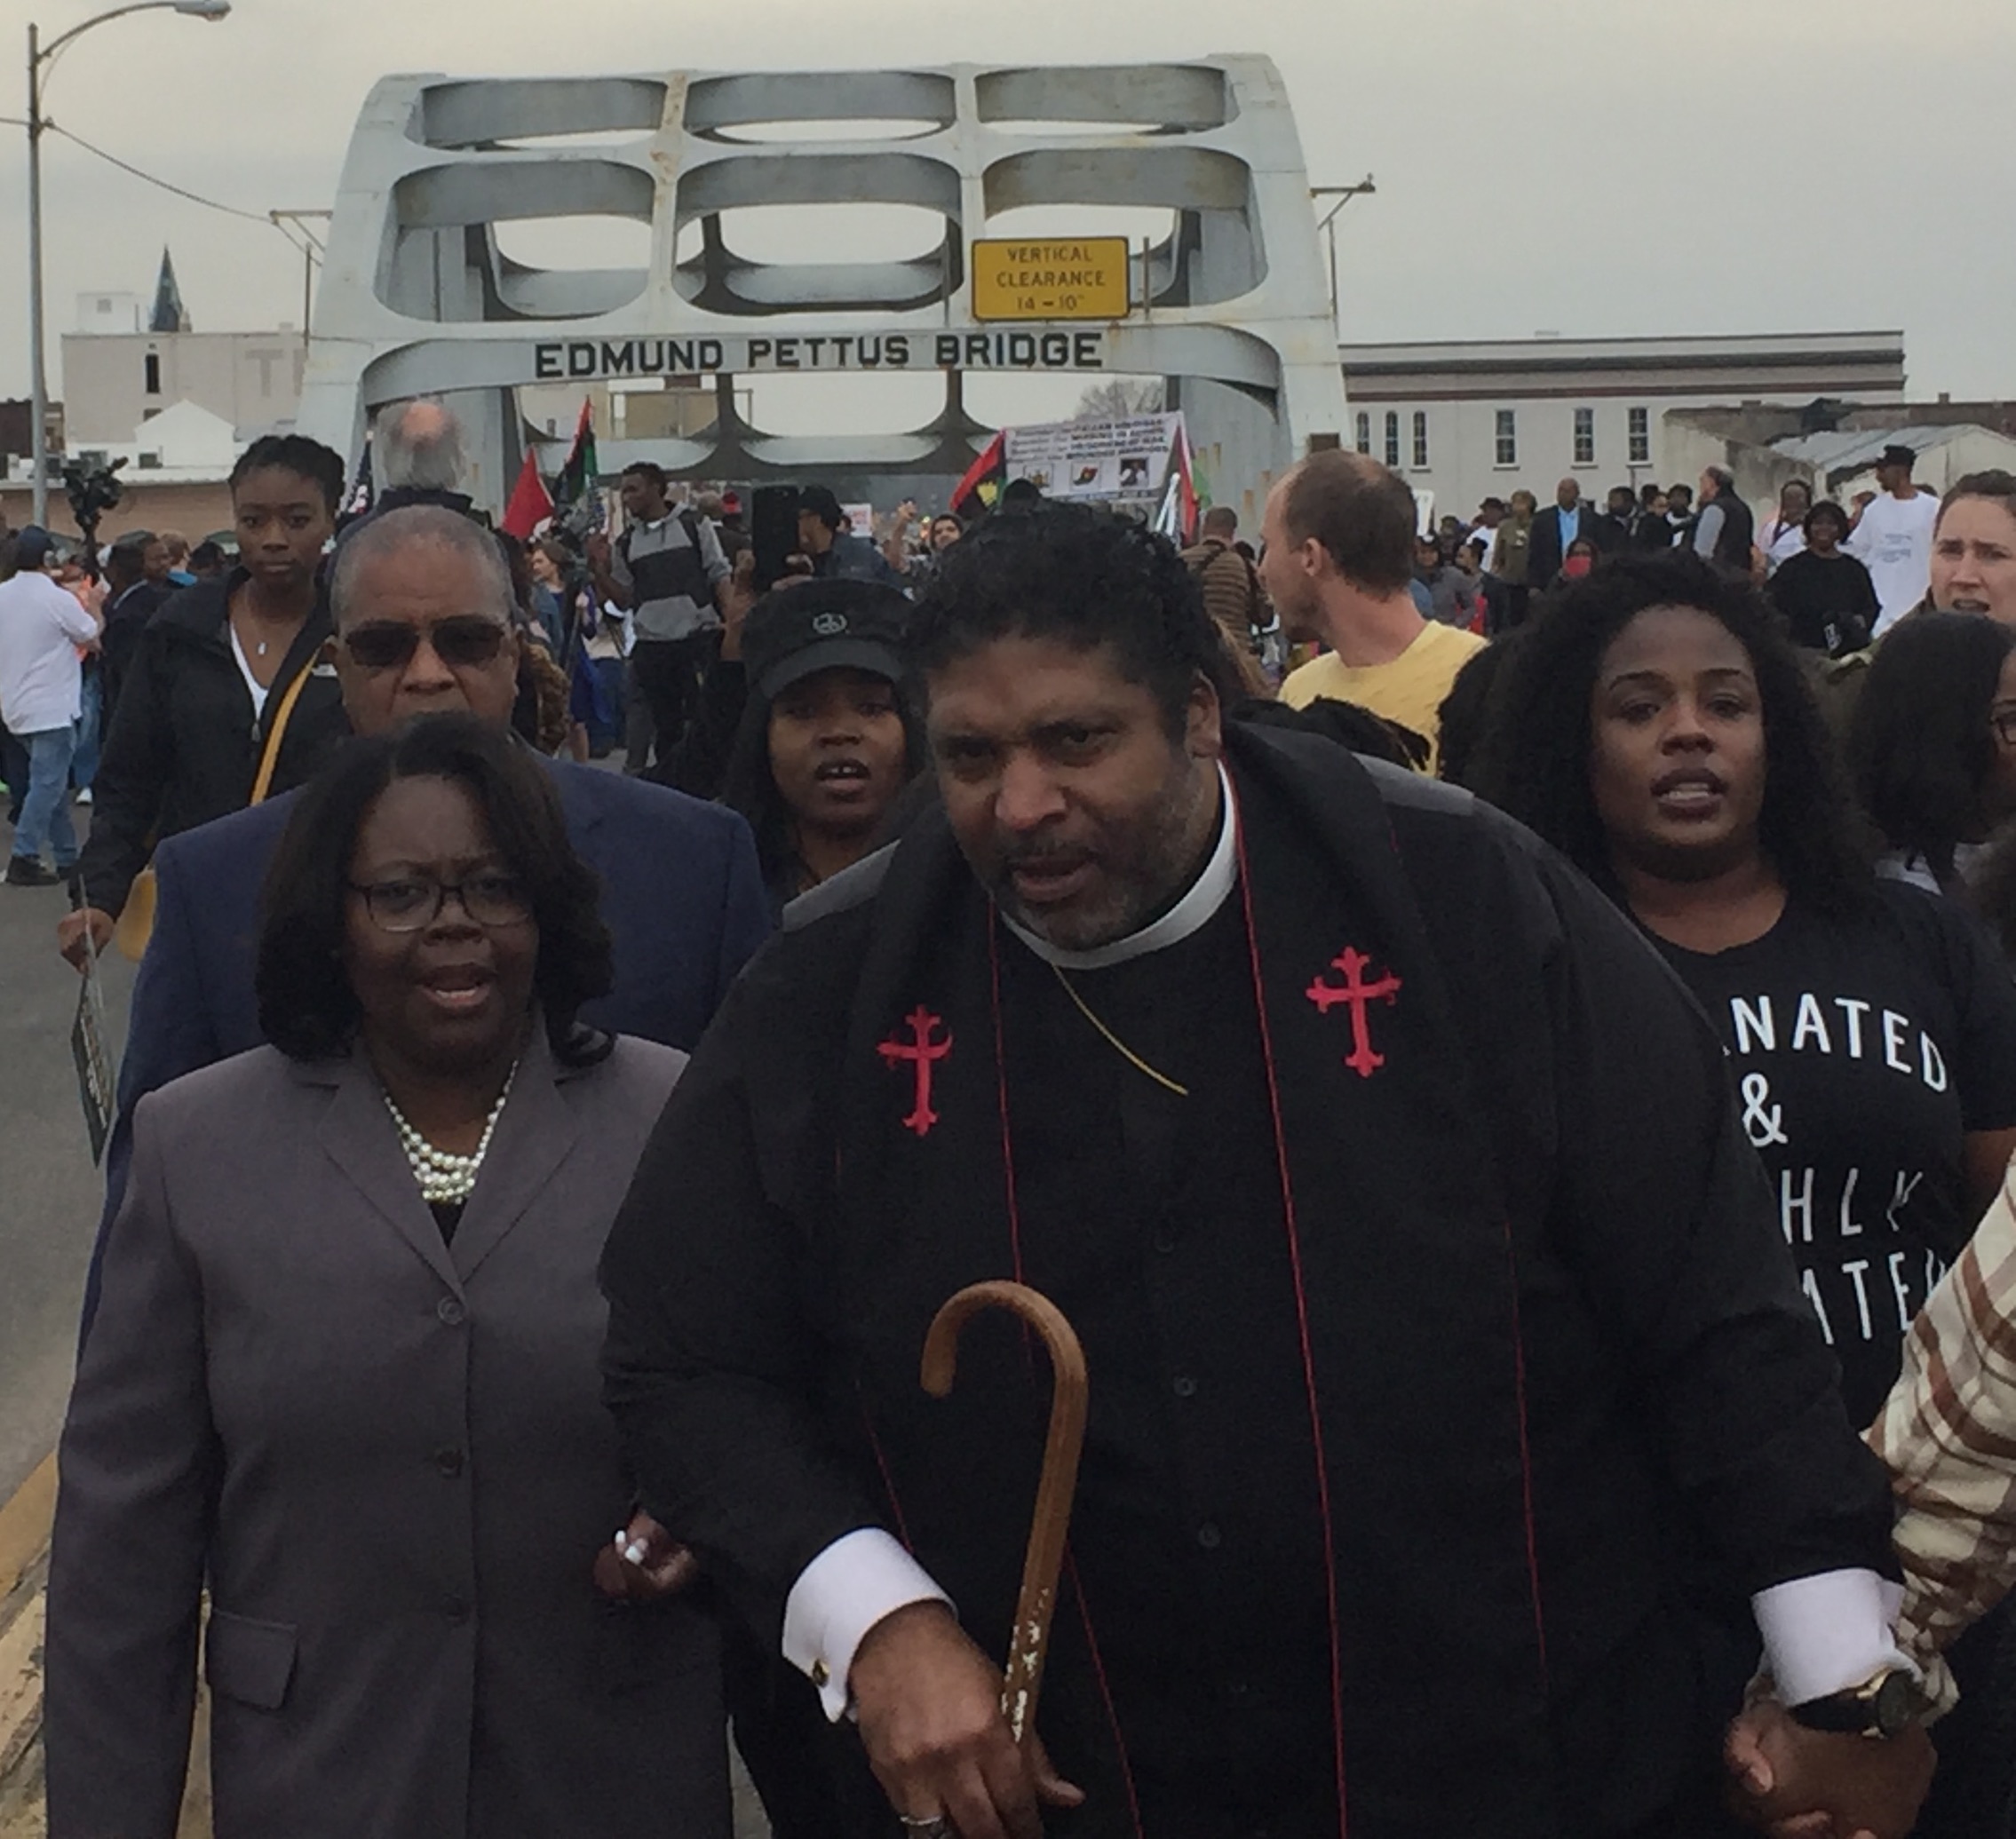  Taking it to the streets: Crossing the infamous Edmund Pettis Bridge in Selma, Ala., last March. 